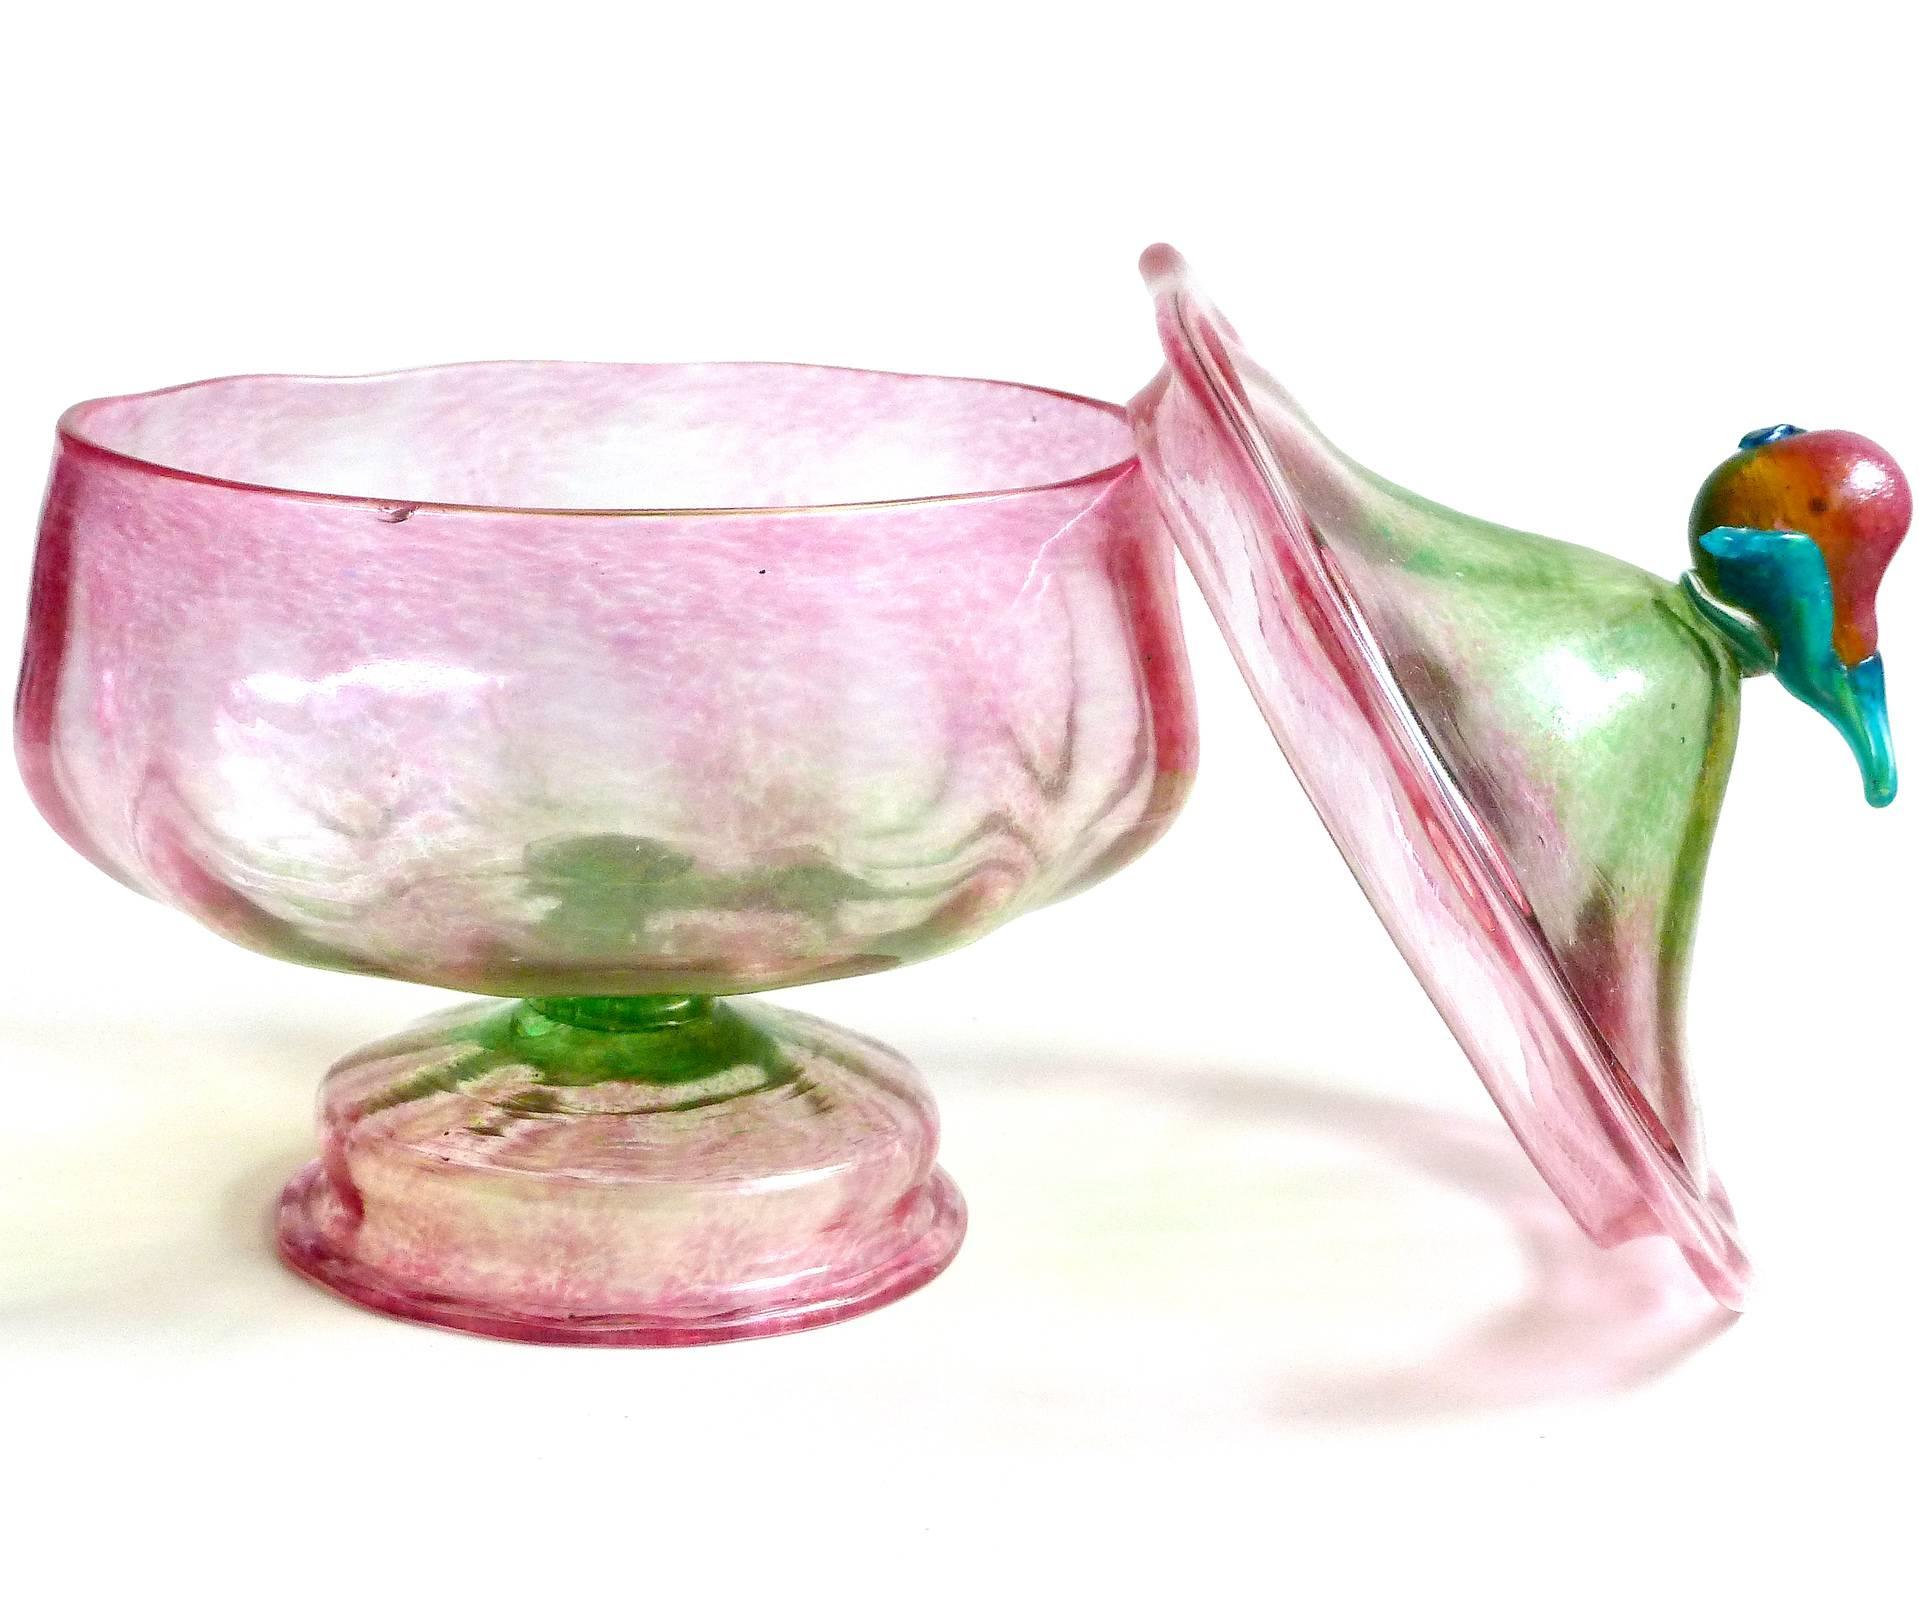 Free shipping worldwide! See details below description.

Rare antique Venetian hand blown pink to green and gold flecks art glass candy jar / container. Attributed to the Salviati company, circa 1900s (if not earlier). The piece has a decorative